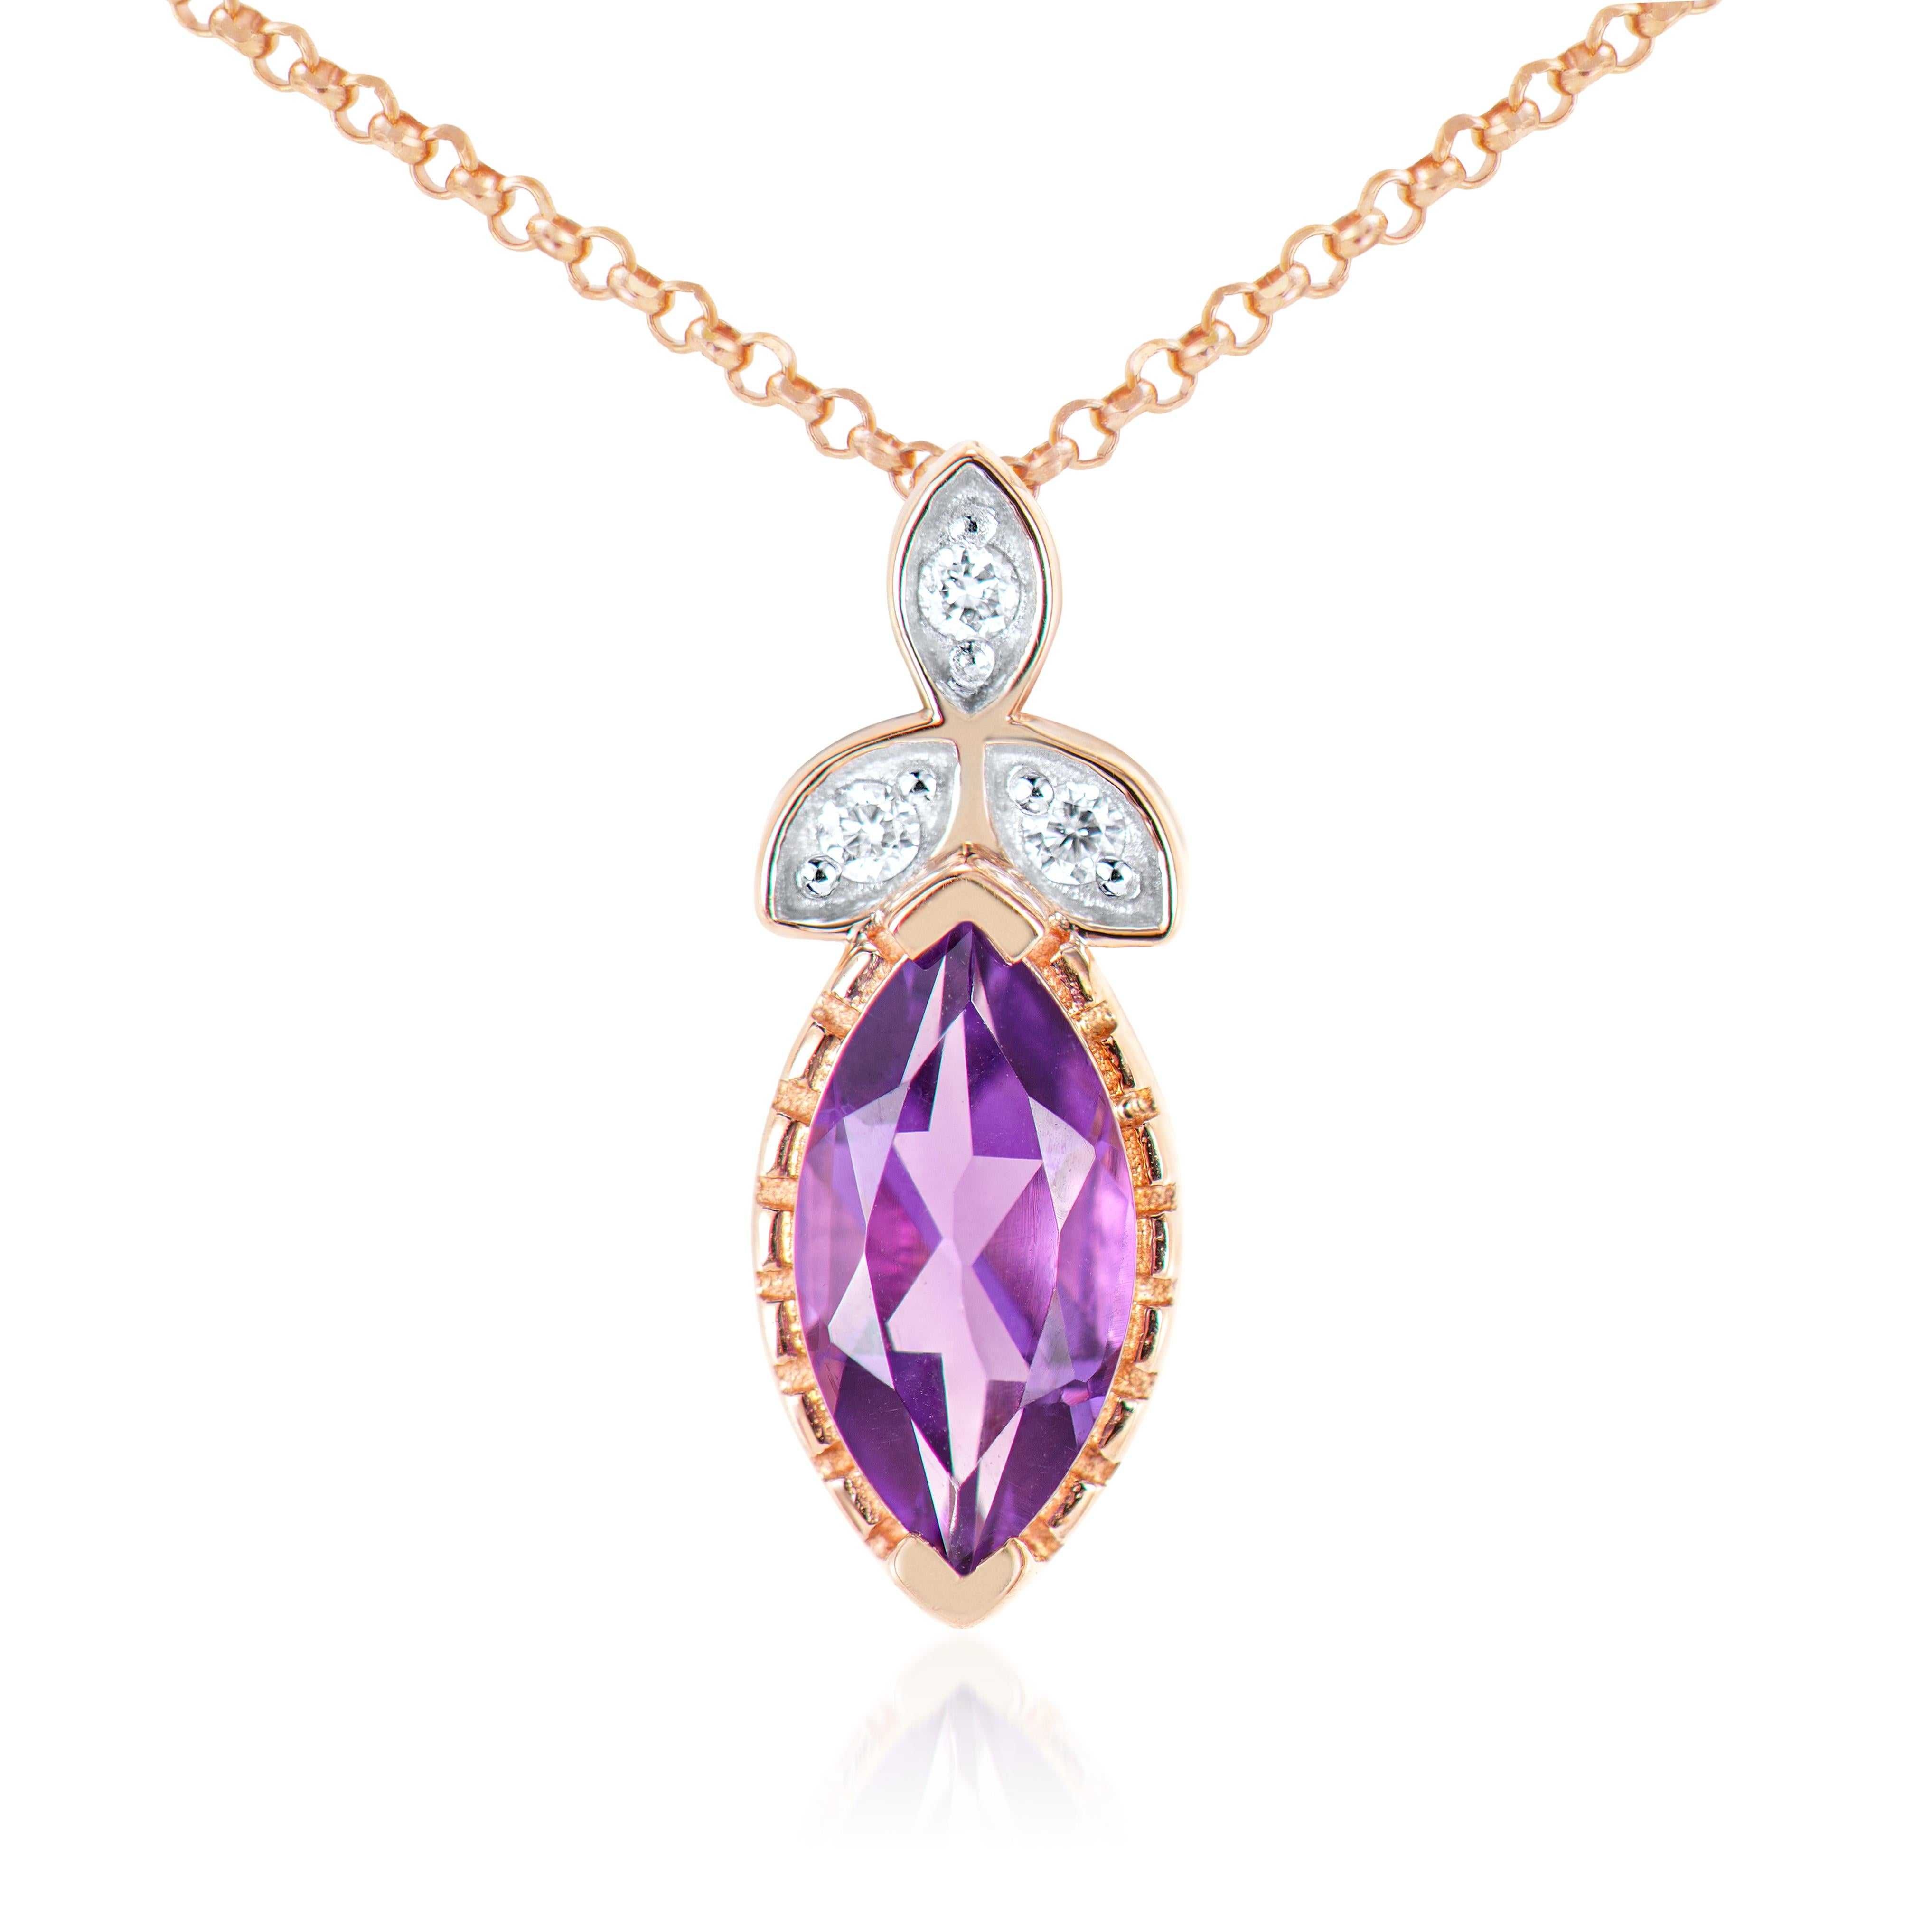 Presented A lovely set of Amethyst for people who value quality and want to wear it to any occasion or celebration. The rose gold Amethyst Pendant adorned with diamonds offer a classic yet elegant appearance.

Amethyst Pendant in 14Karat Rose Gold